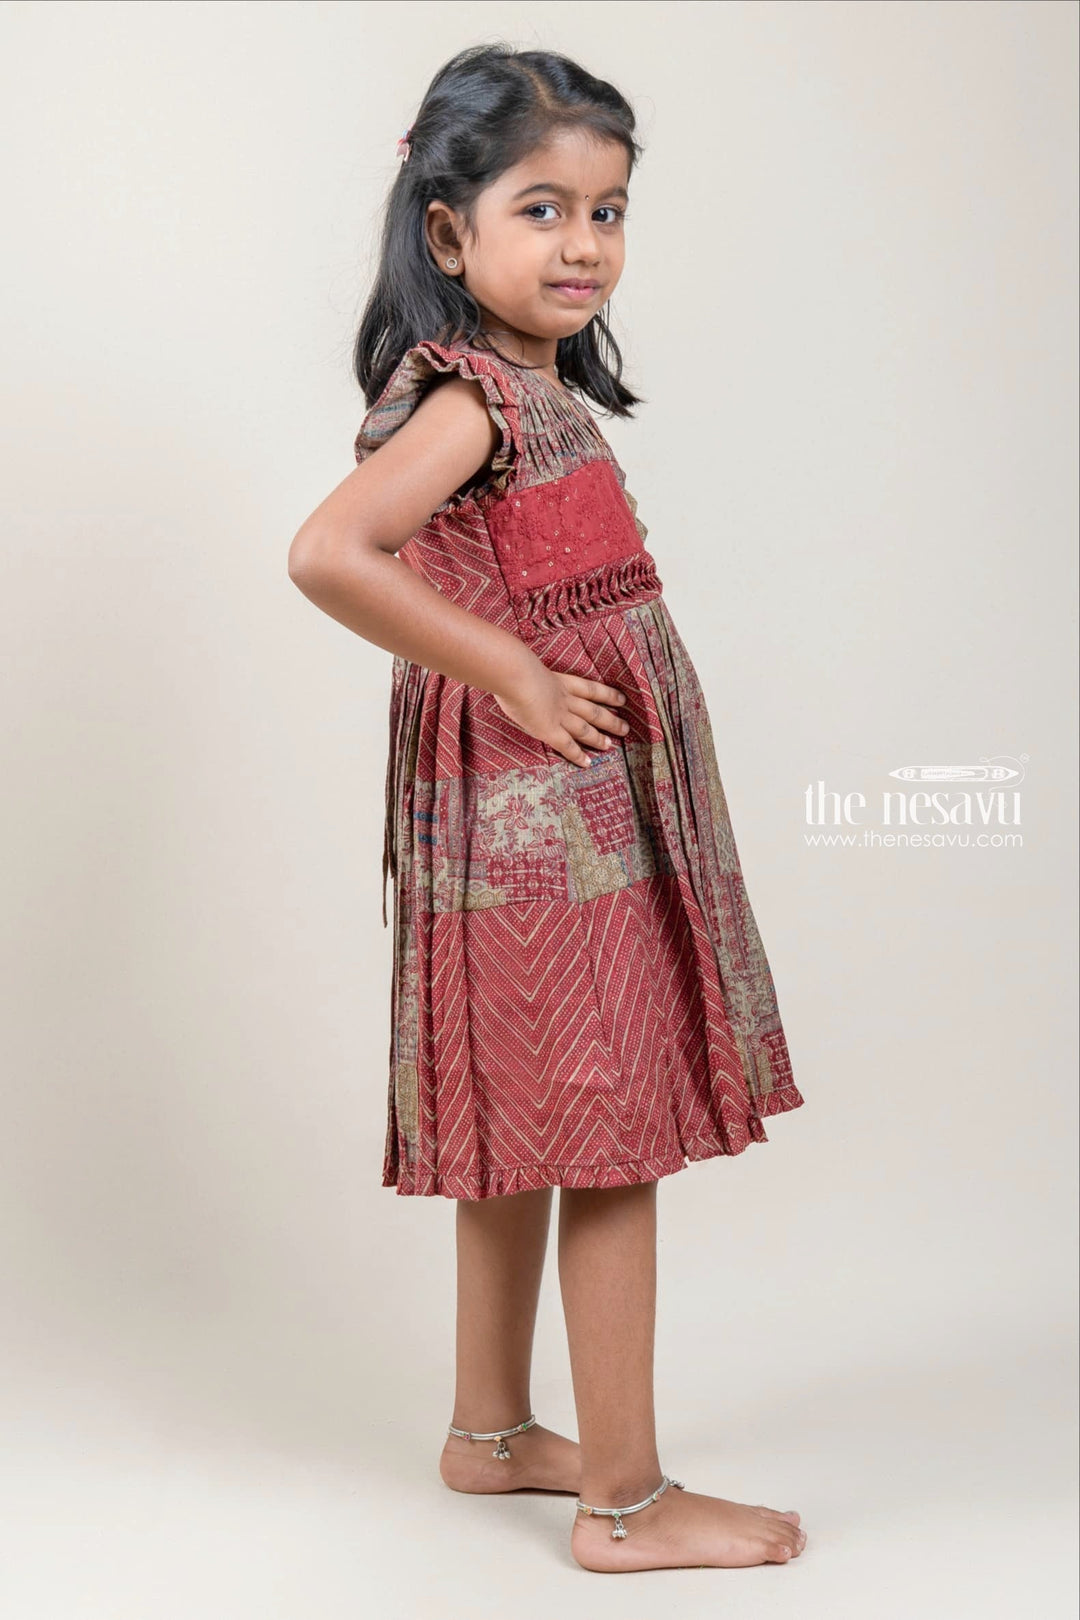 The Nesavu Girls Cotton Frock Attractive Orangered Floral And Zig-Zag Printed Casual Cotton Frock For Girls Nesavu Cute Cotton Dress For Girls | Floral Printed Cotton Frock | The Nesavu